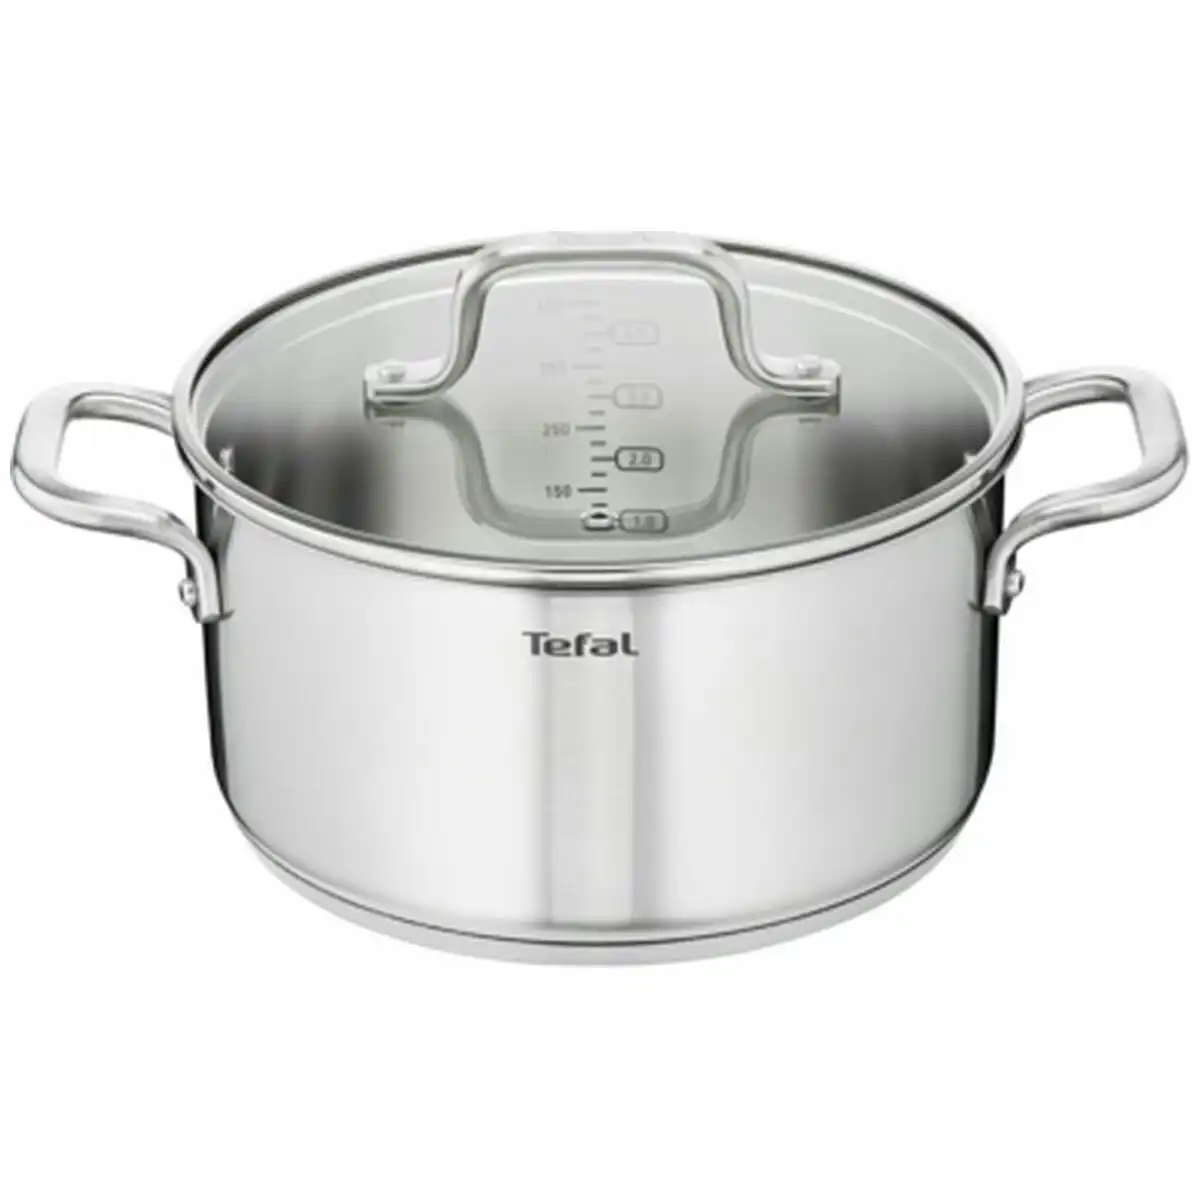 Tefal 24cm Virtuoso Stainless Steel Induction Stewpot